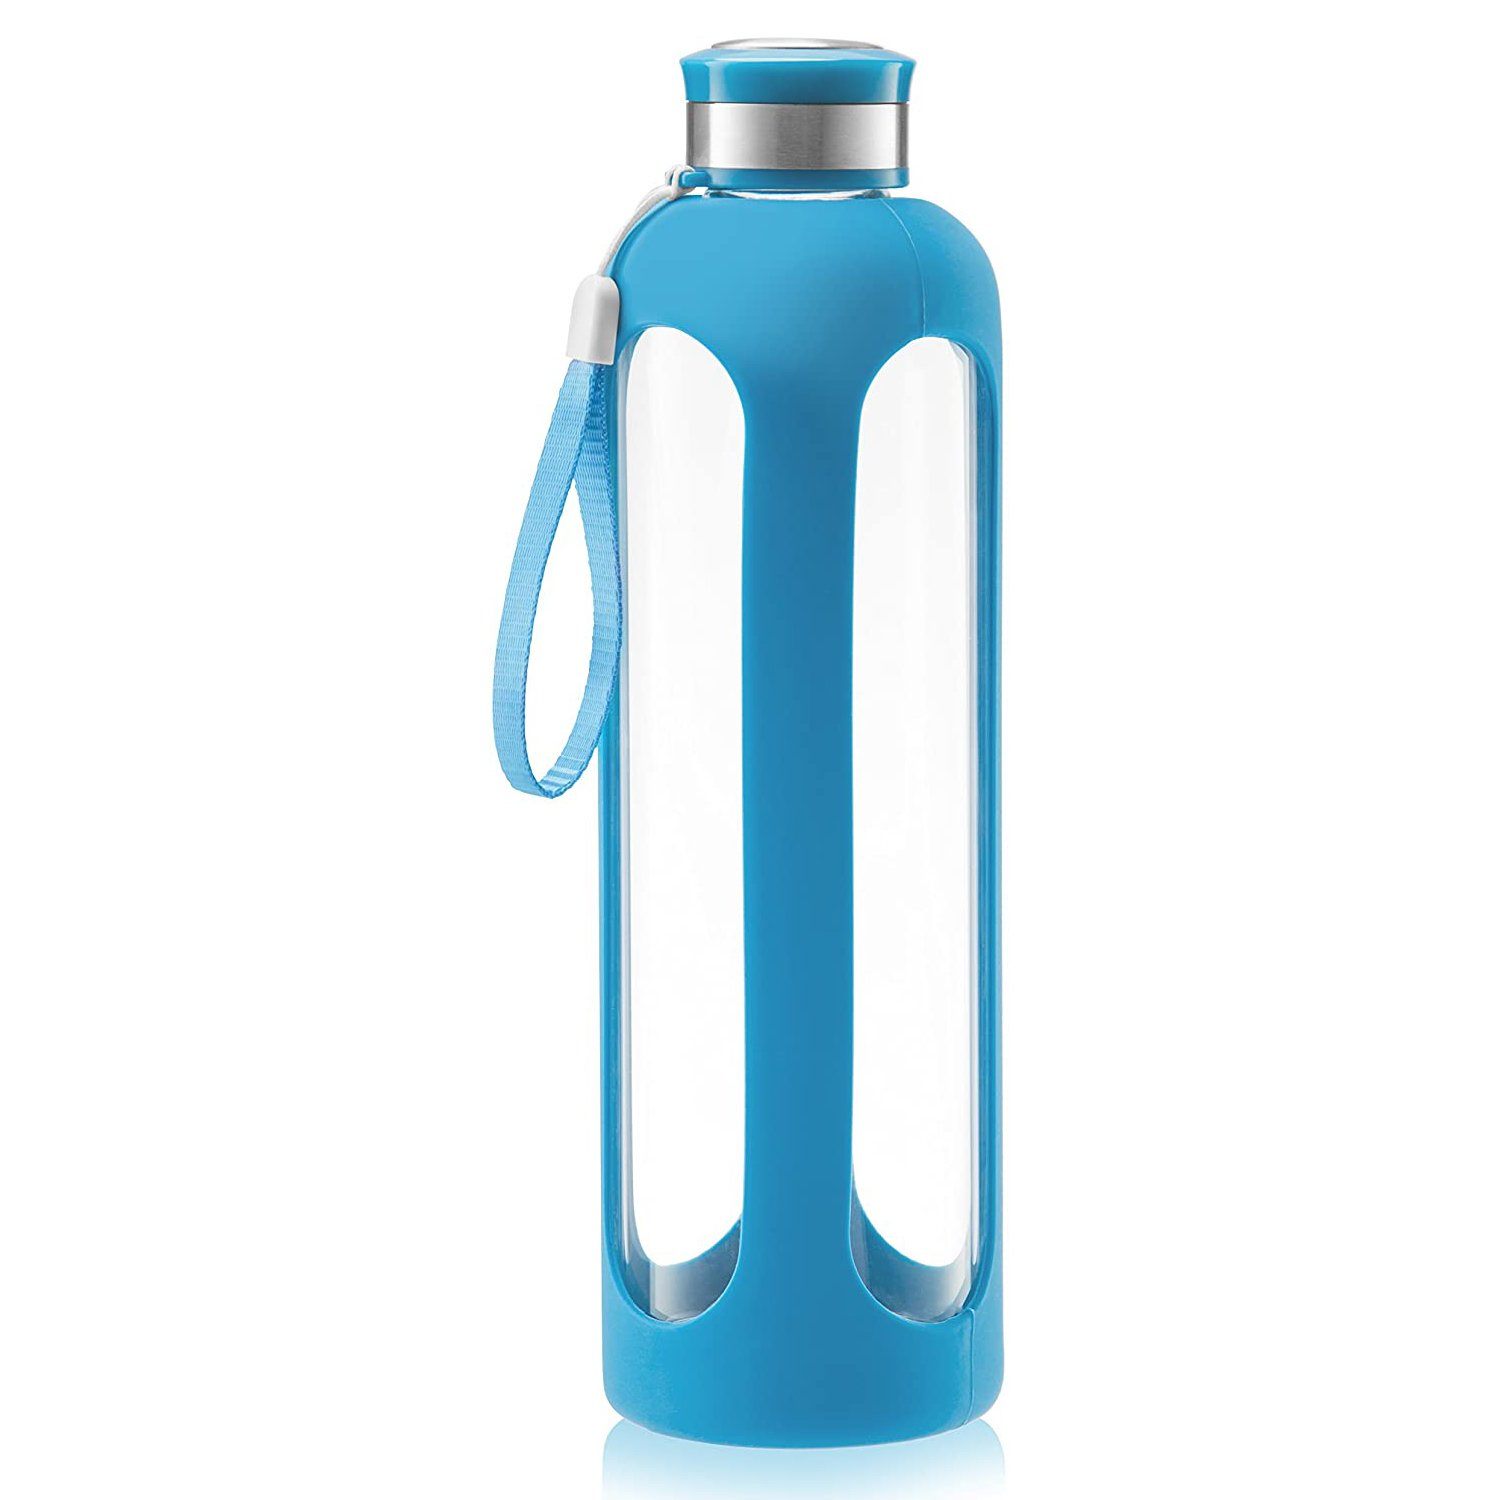 Swig Savvy Glass Water Bottles with Protective Silicone Sleeve &amp; Stainless Steel Leak Proof Lid / Blue